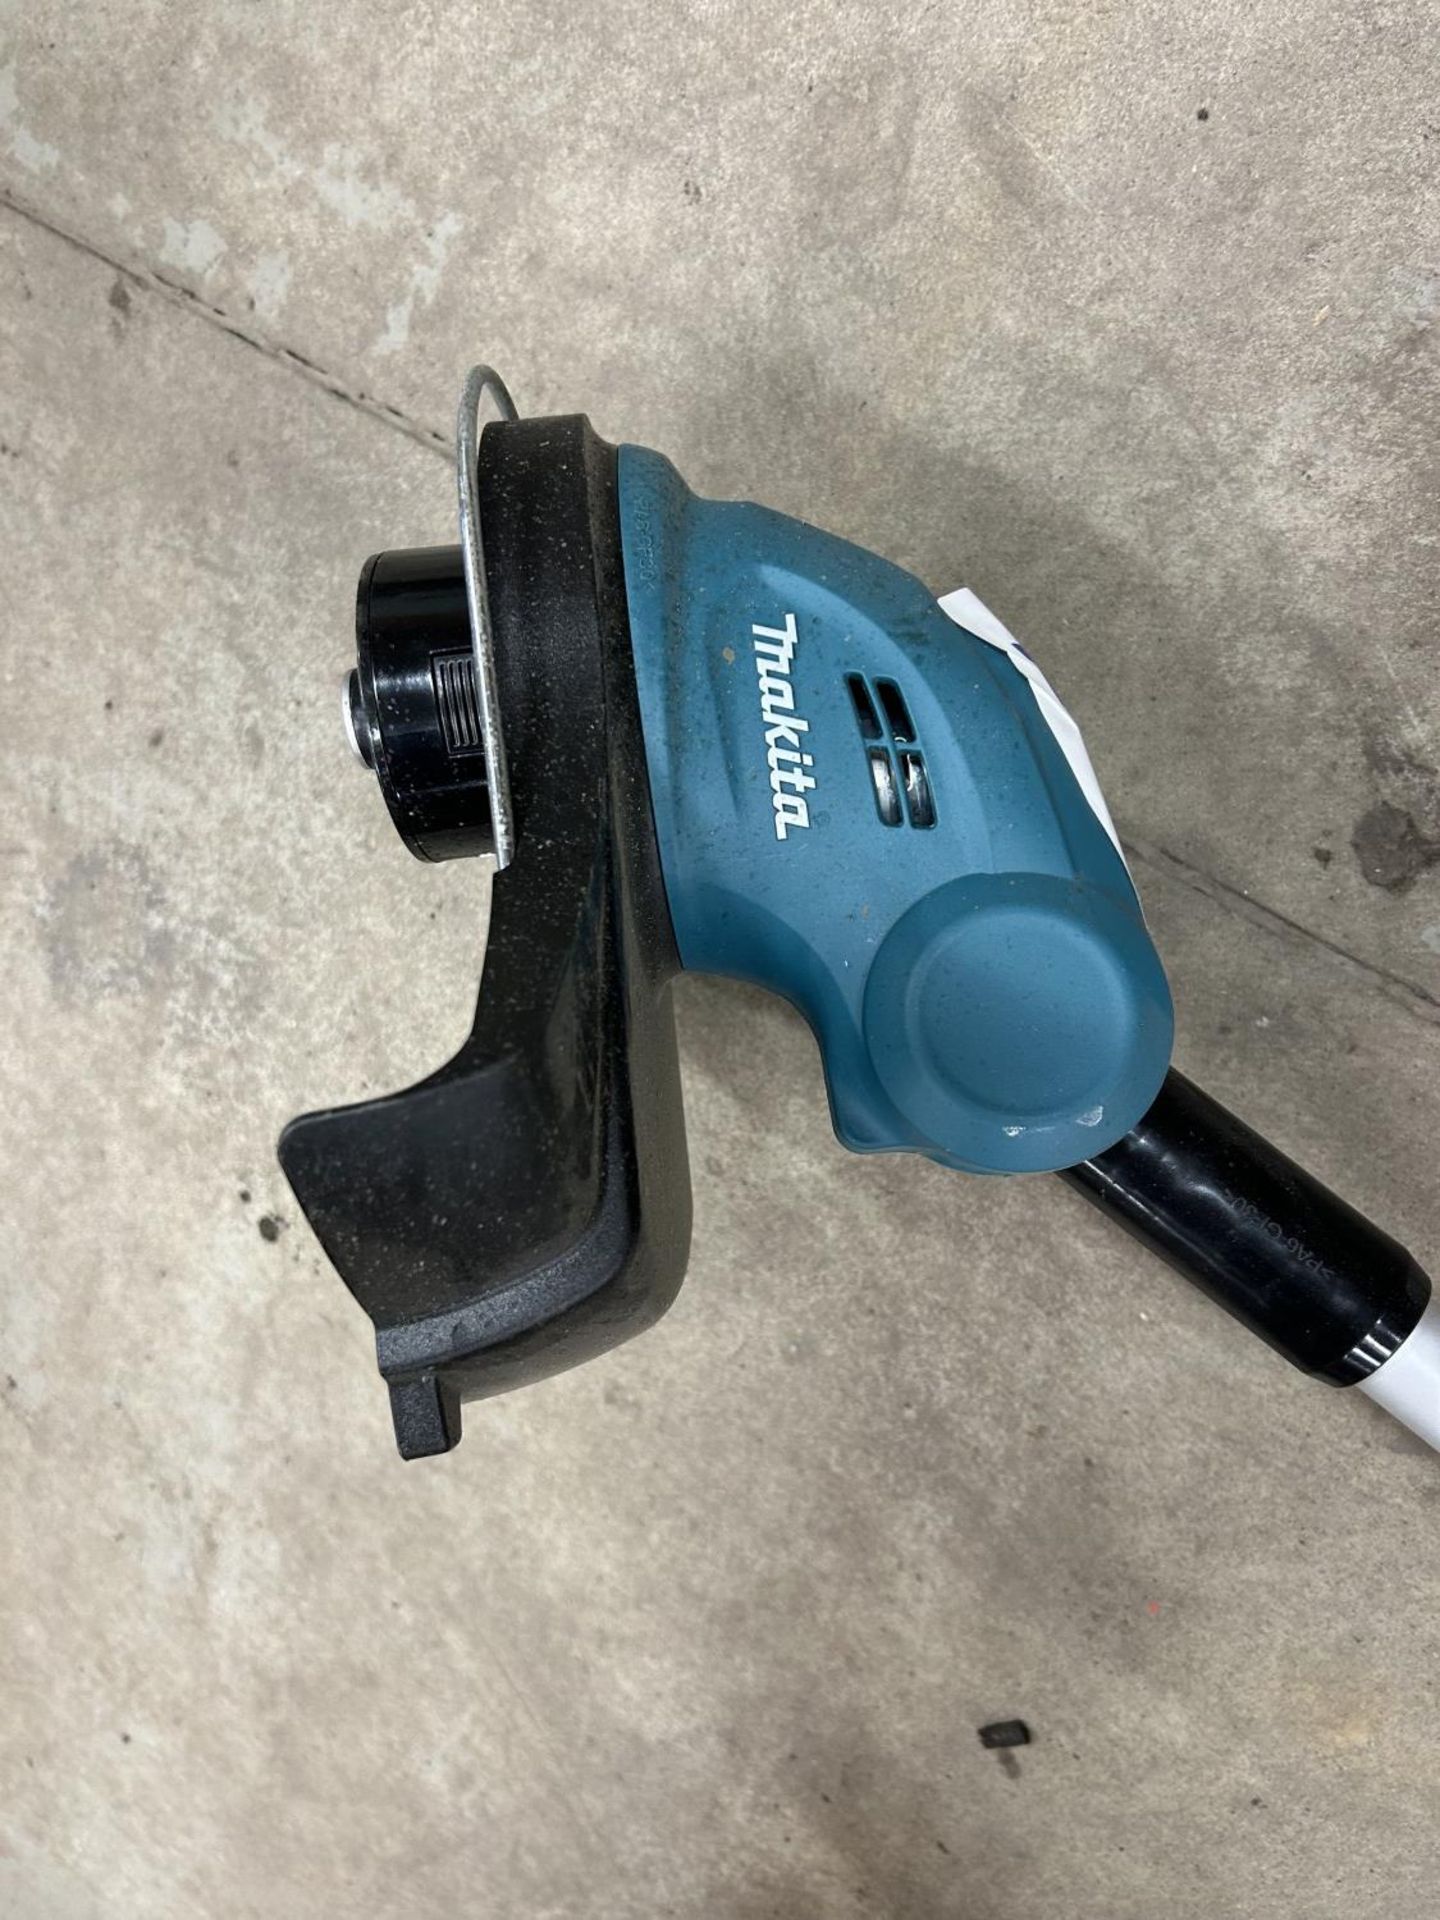 MAKITA CORDLESS STRING TIMMER W/ BATTERY (NO CHARGER) - Image 2 of 3